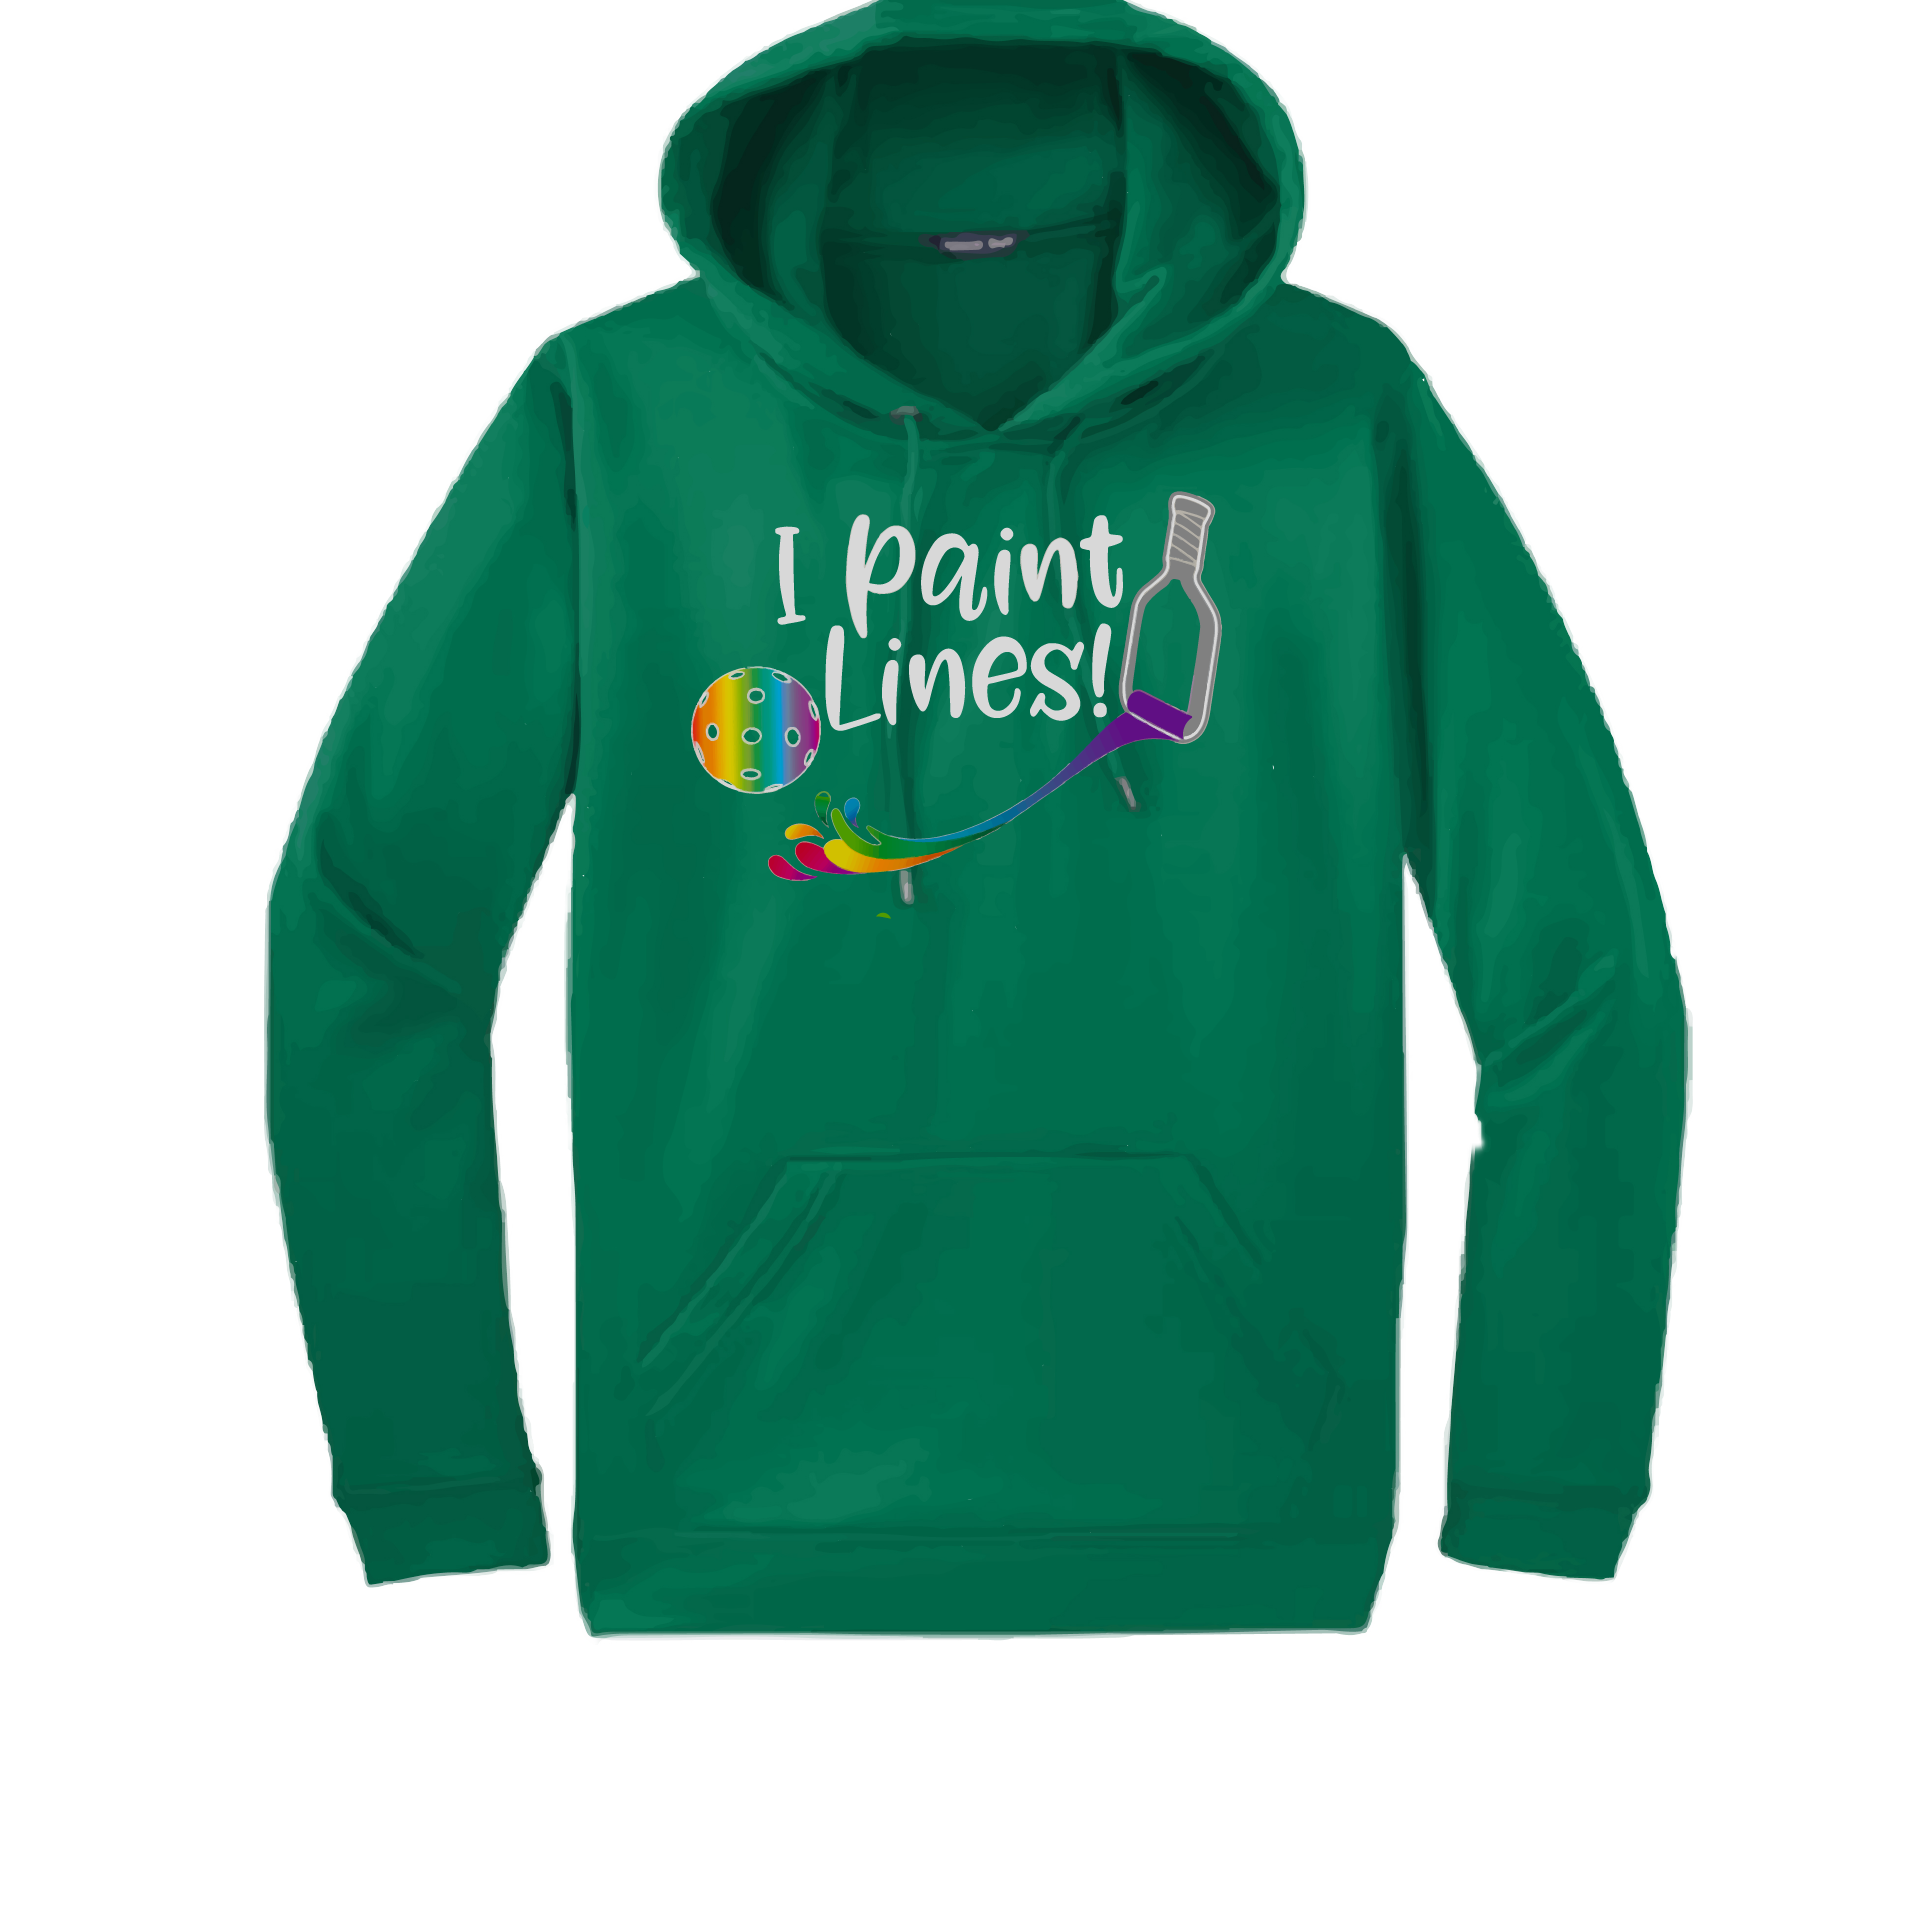 Pickleball Design: I Paint Lines  Unisex Hooded Sweatshirt: Moisture-wicking, double-lined hood, front pouch pocket.  This unisex hooded sweatshirt is ultra comfortable and soft. Stay warm on the Pickleball courts while being that hit with this one of kind design.